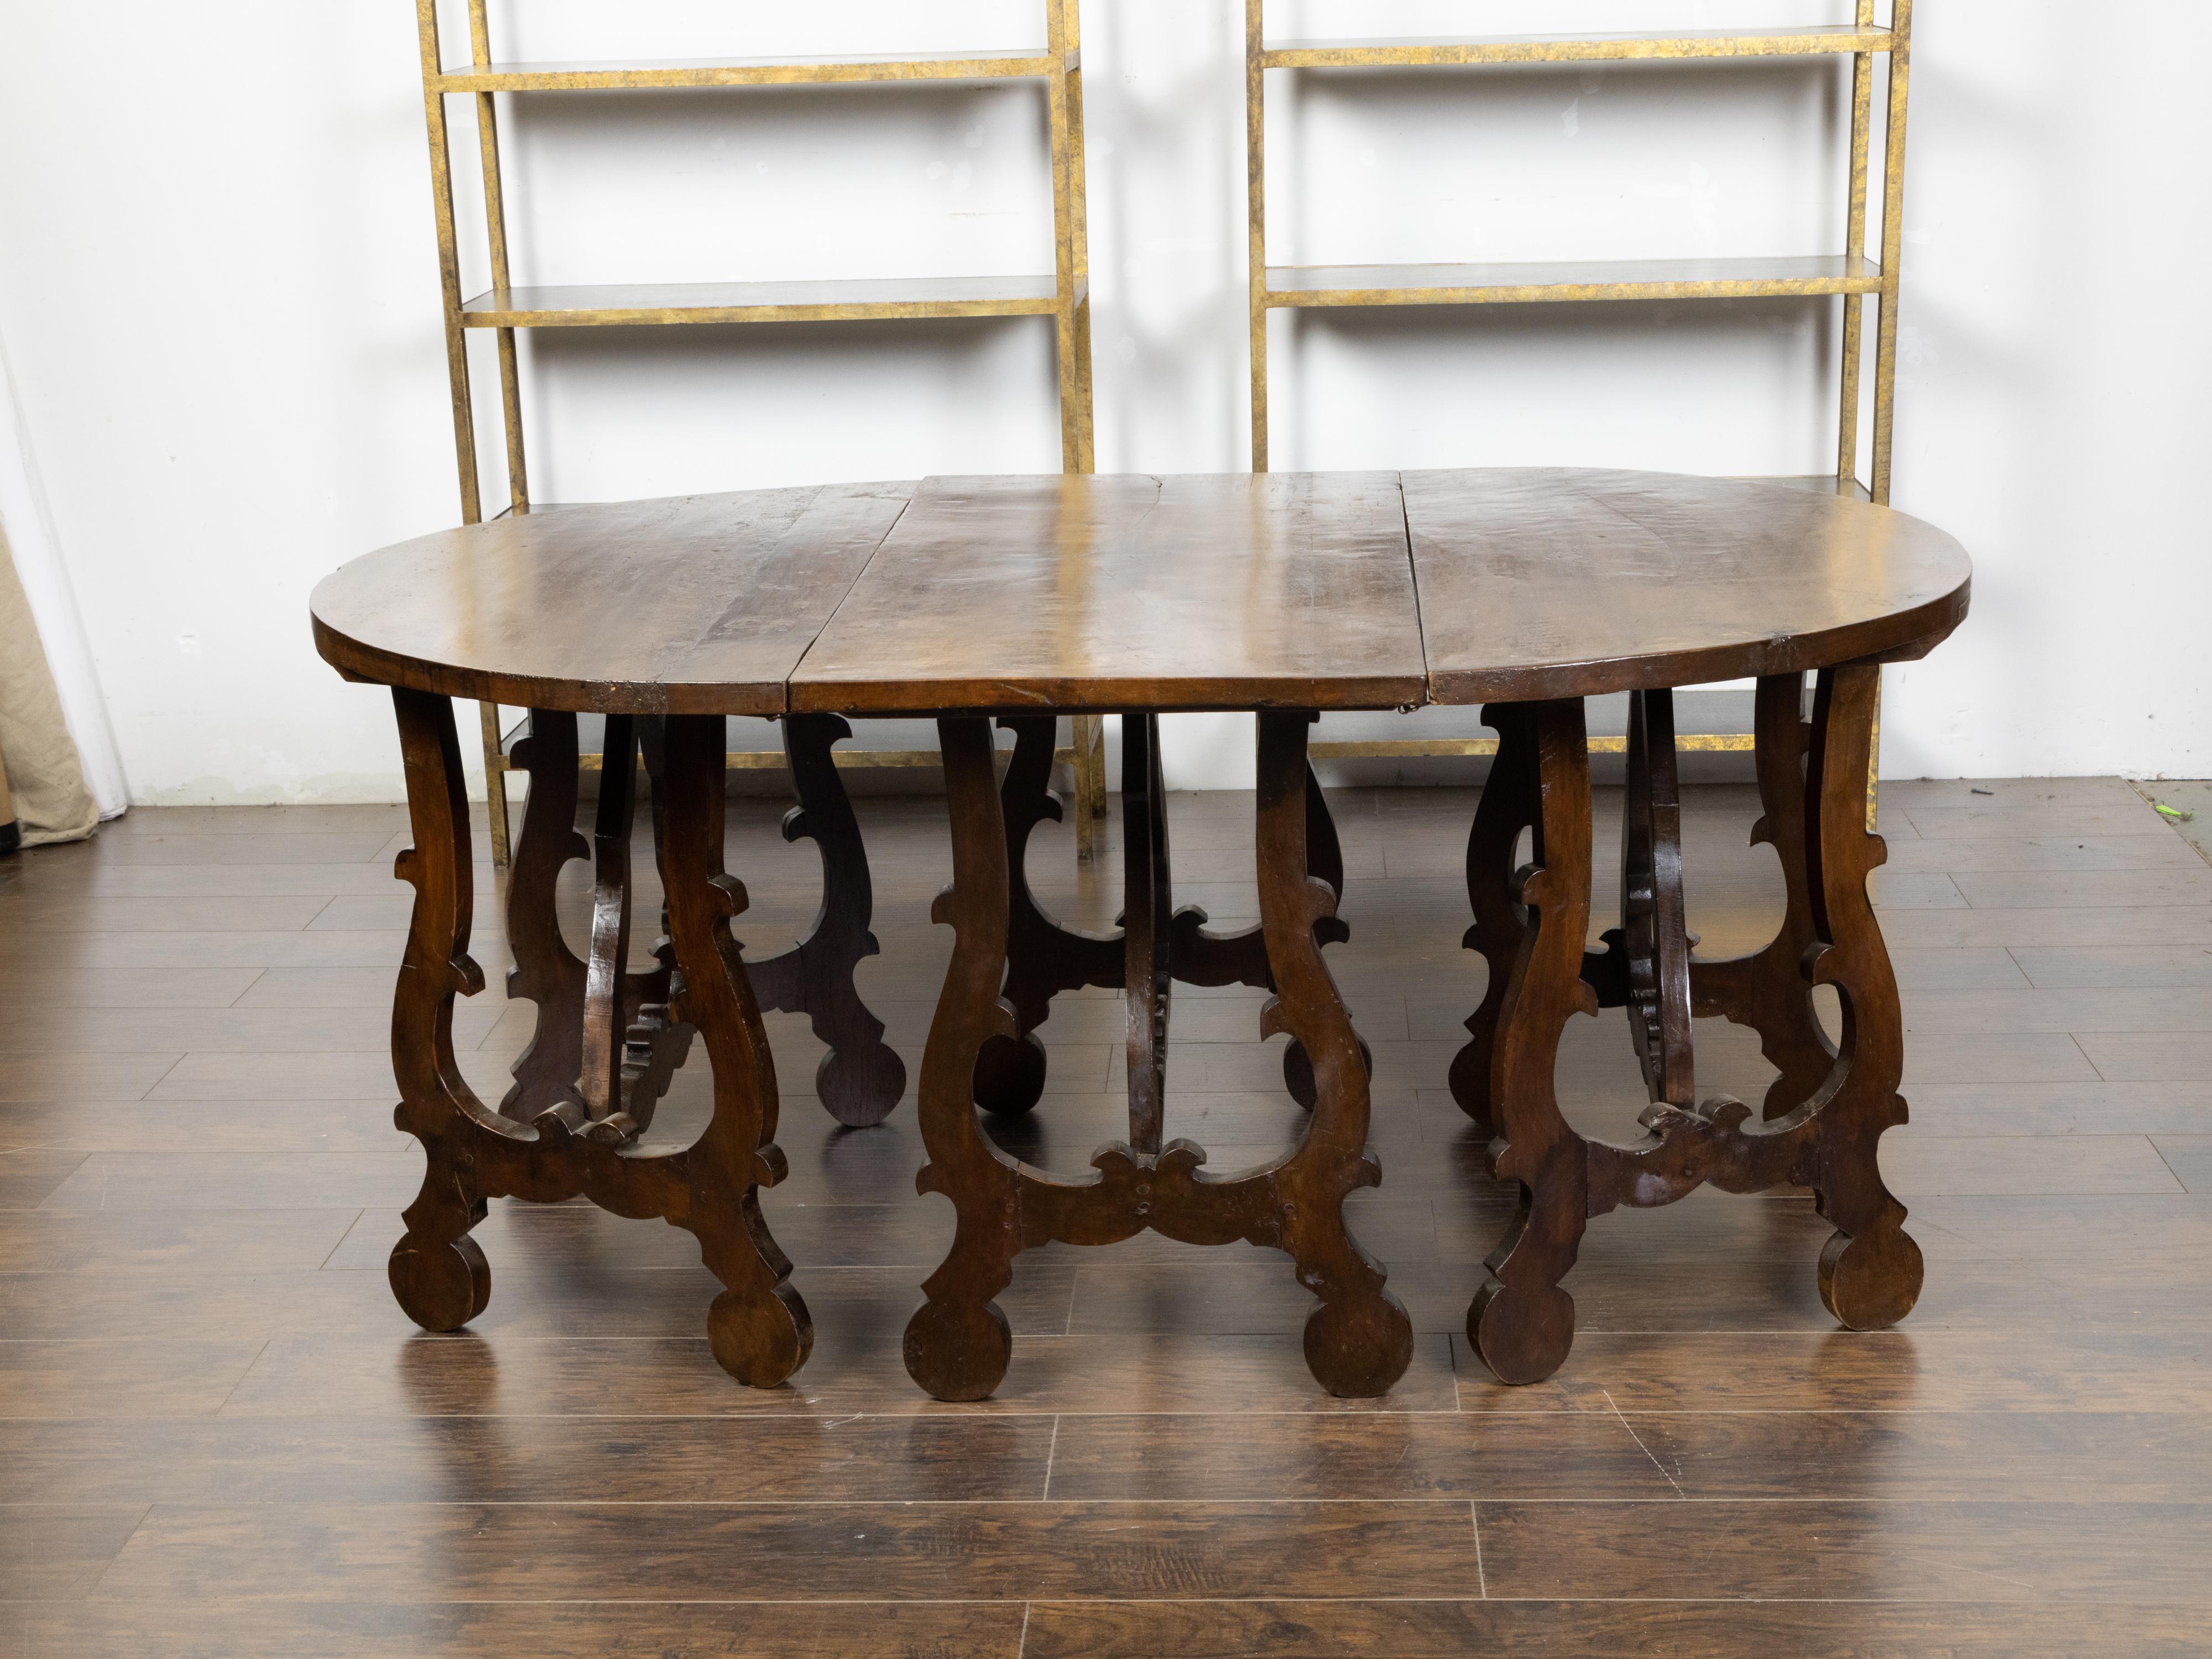 Three-Piece Italian Baroque Style Oval Top Table with Carved Lyre Shaped Legs For Sale 5